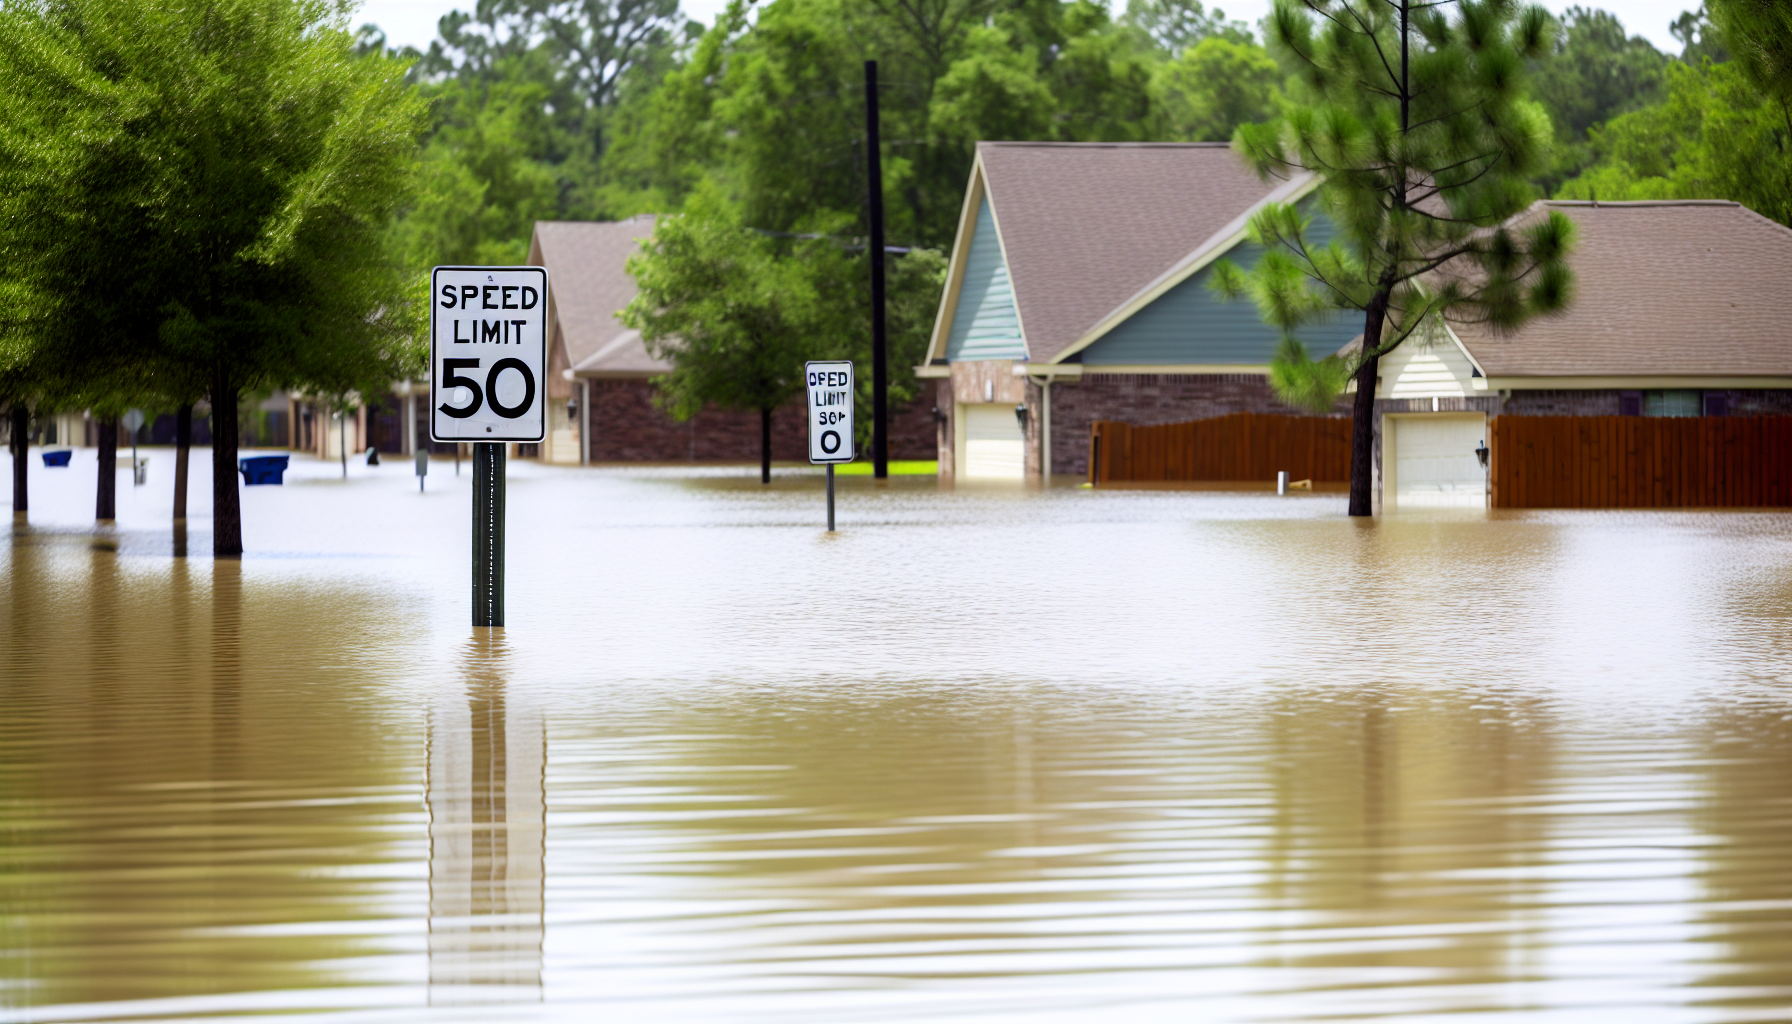 Flooded neighborhood. Flood waters cover a speed limit sign, houses in the background. 